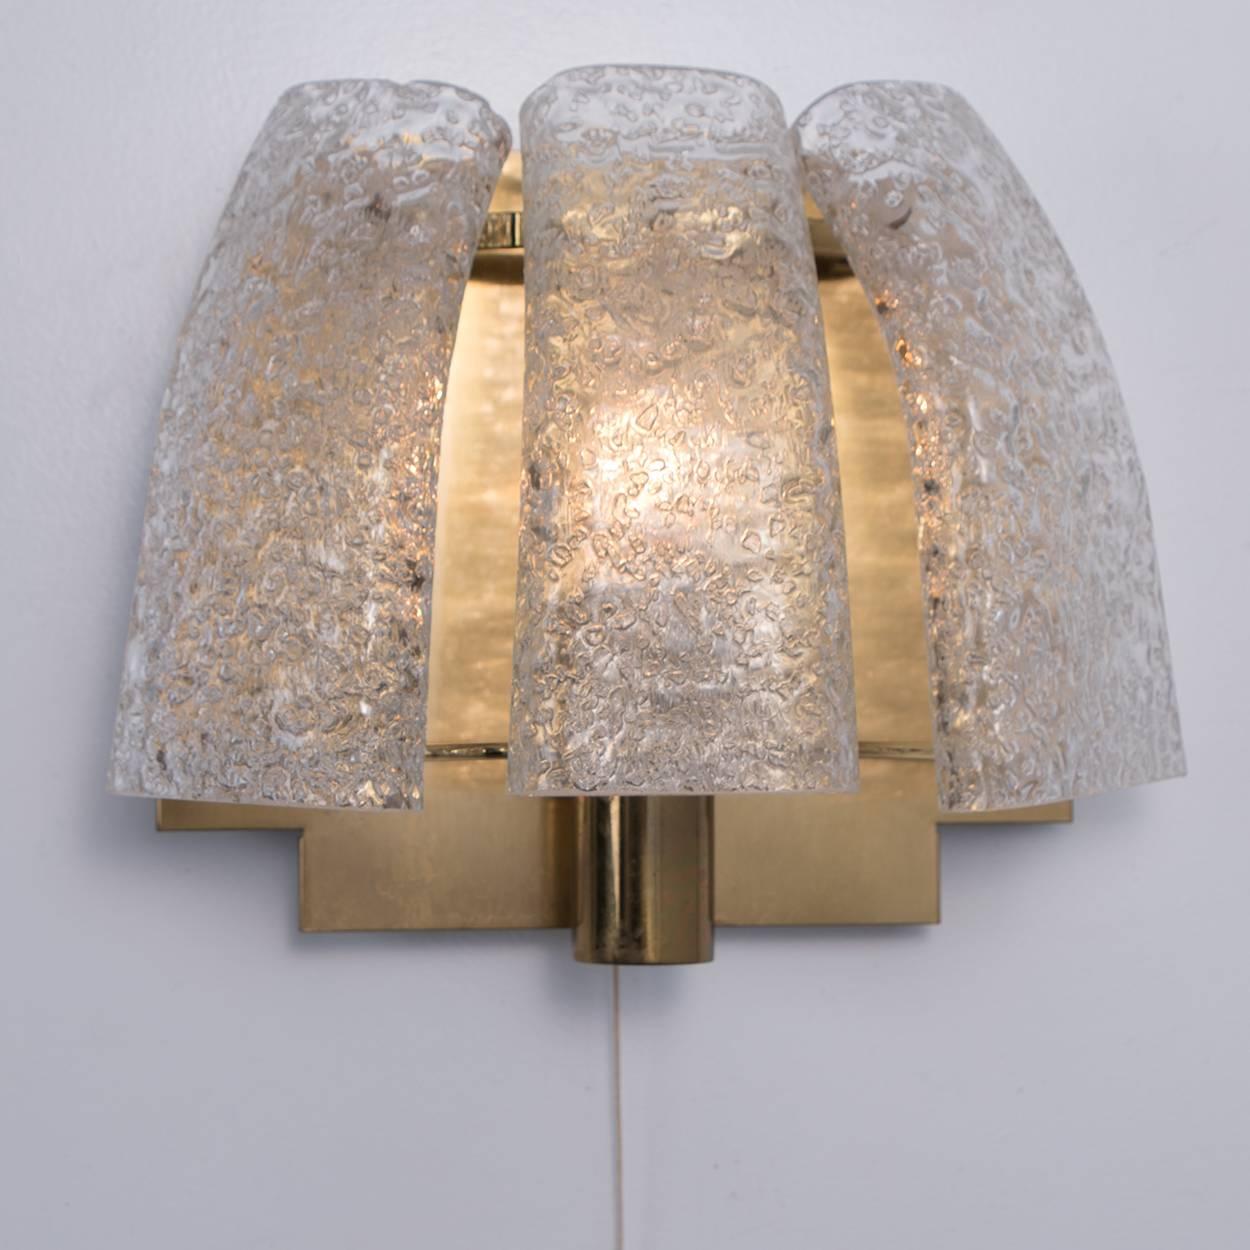 Metal Doria Light Fixtures, One Chandelier and Two Wall Sconces For Sale